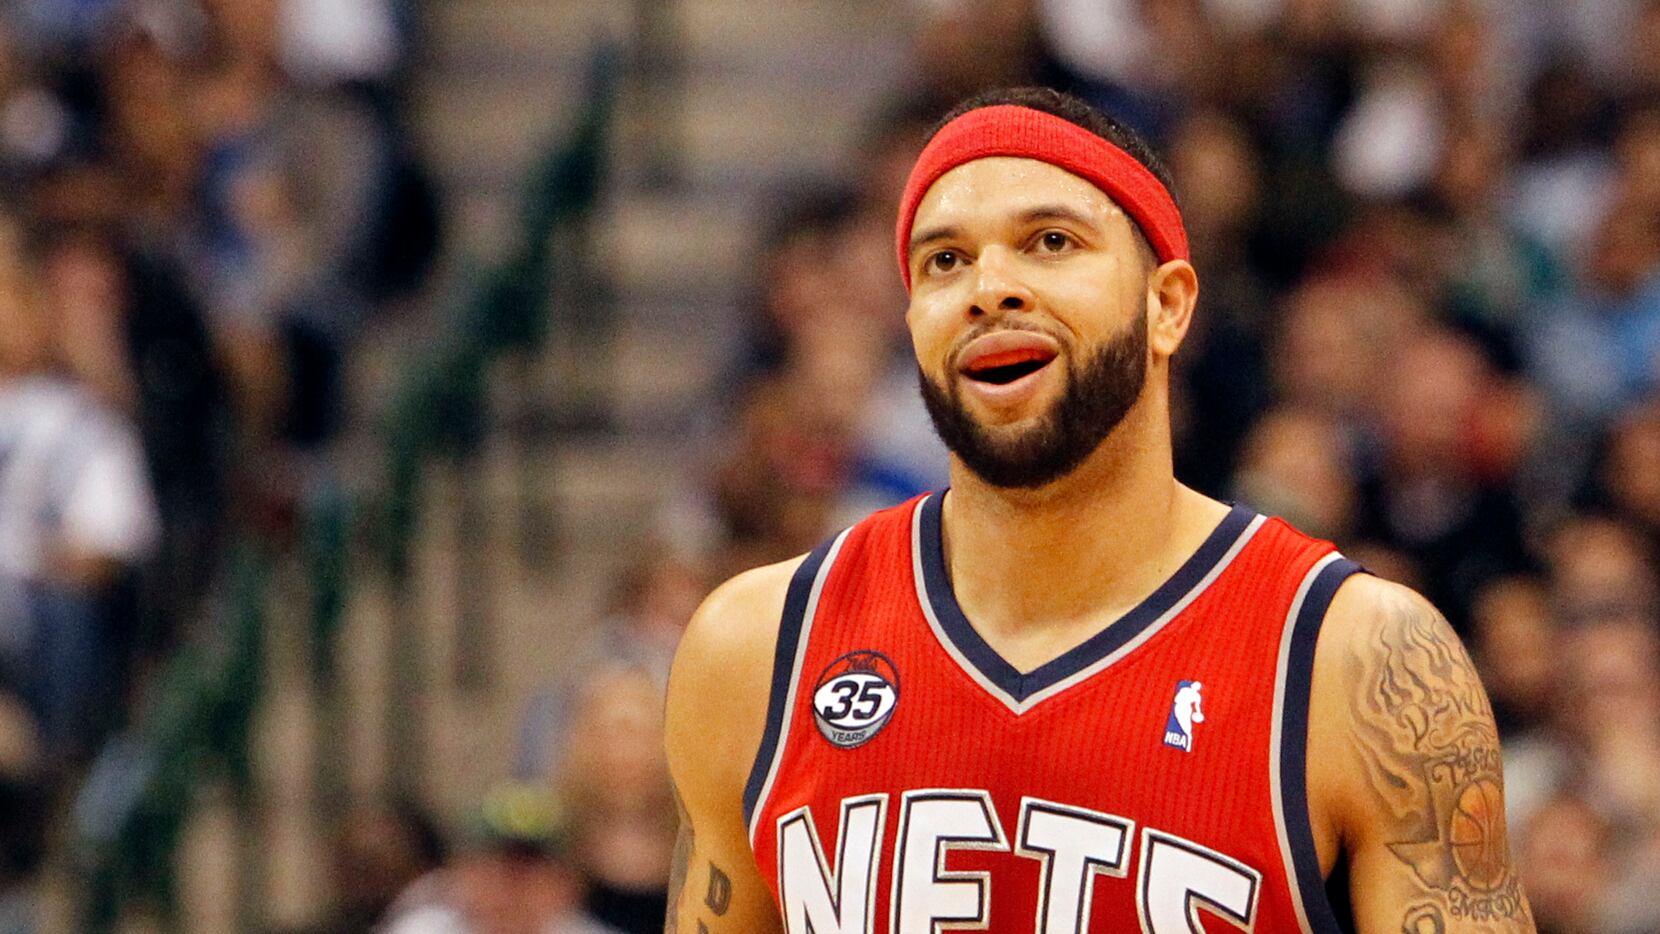 Now what? Mavs fail to net Deron Williams, likely to lose Jason Terry